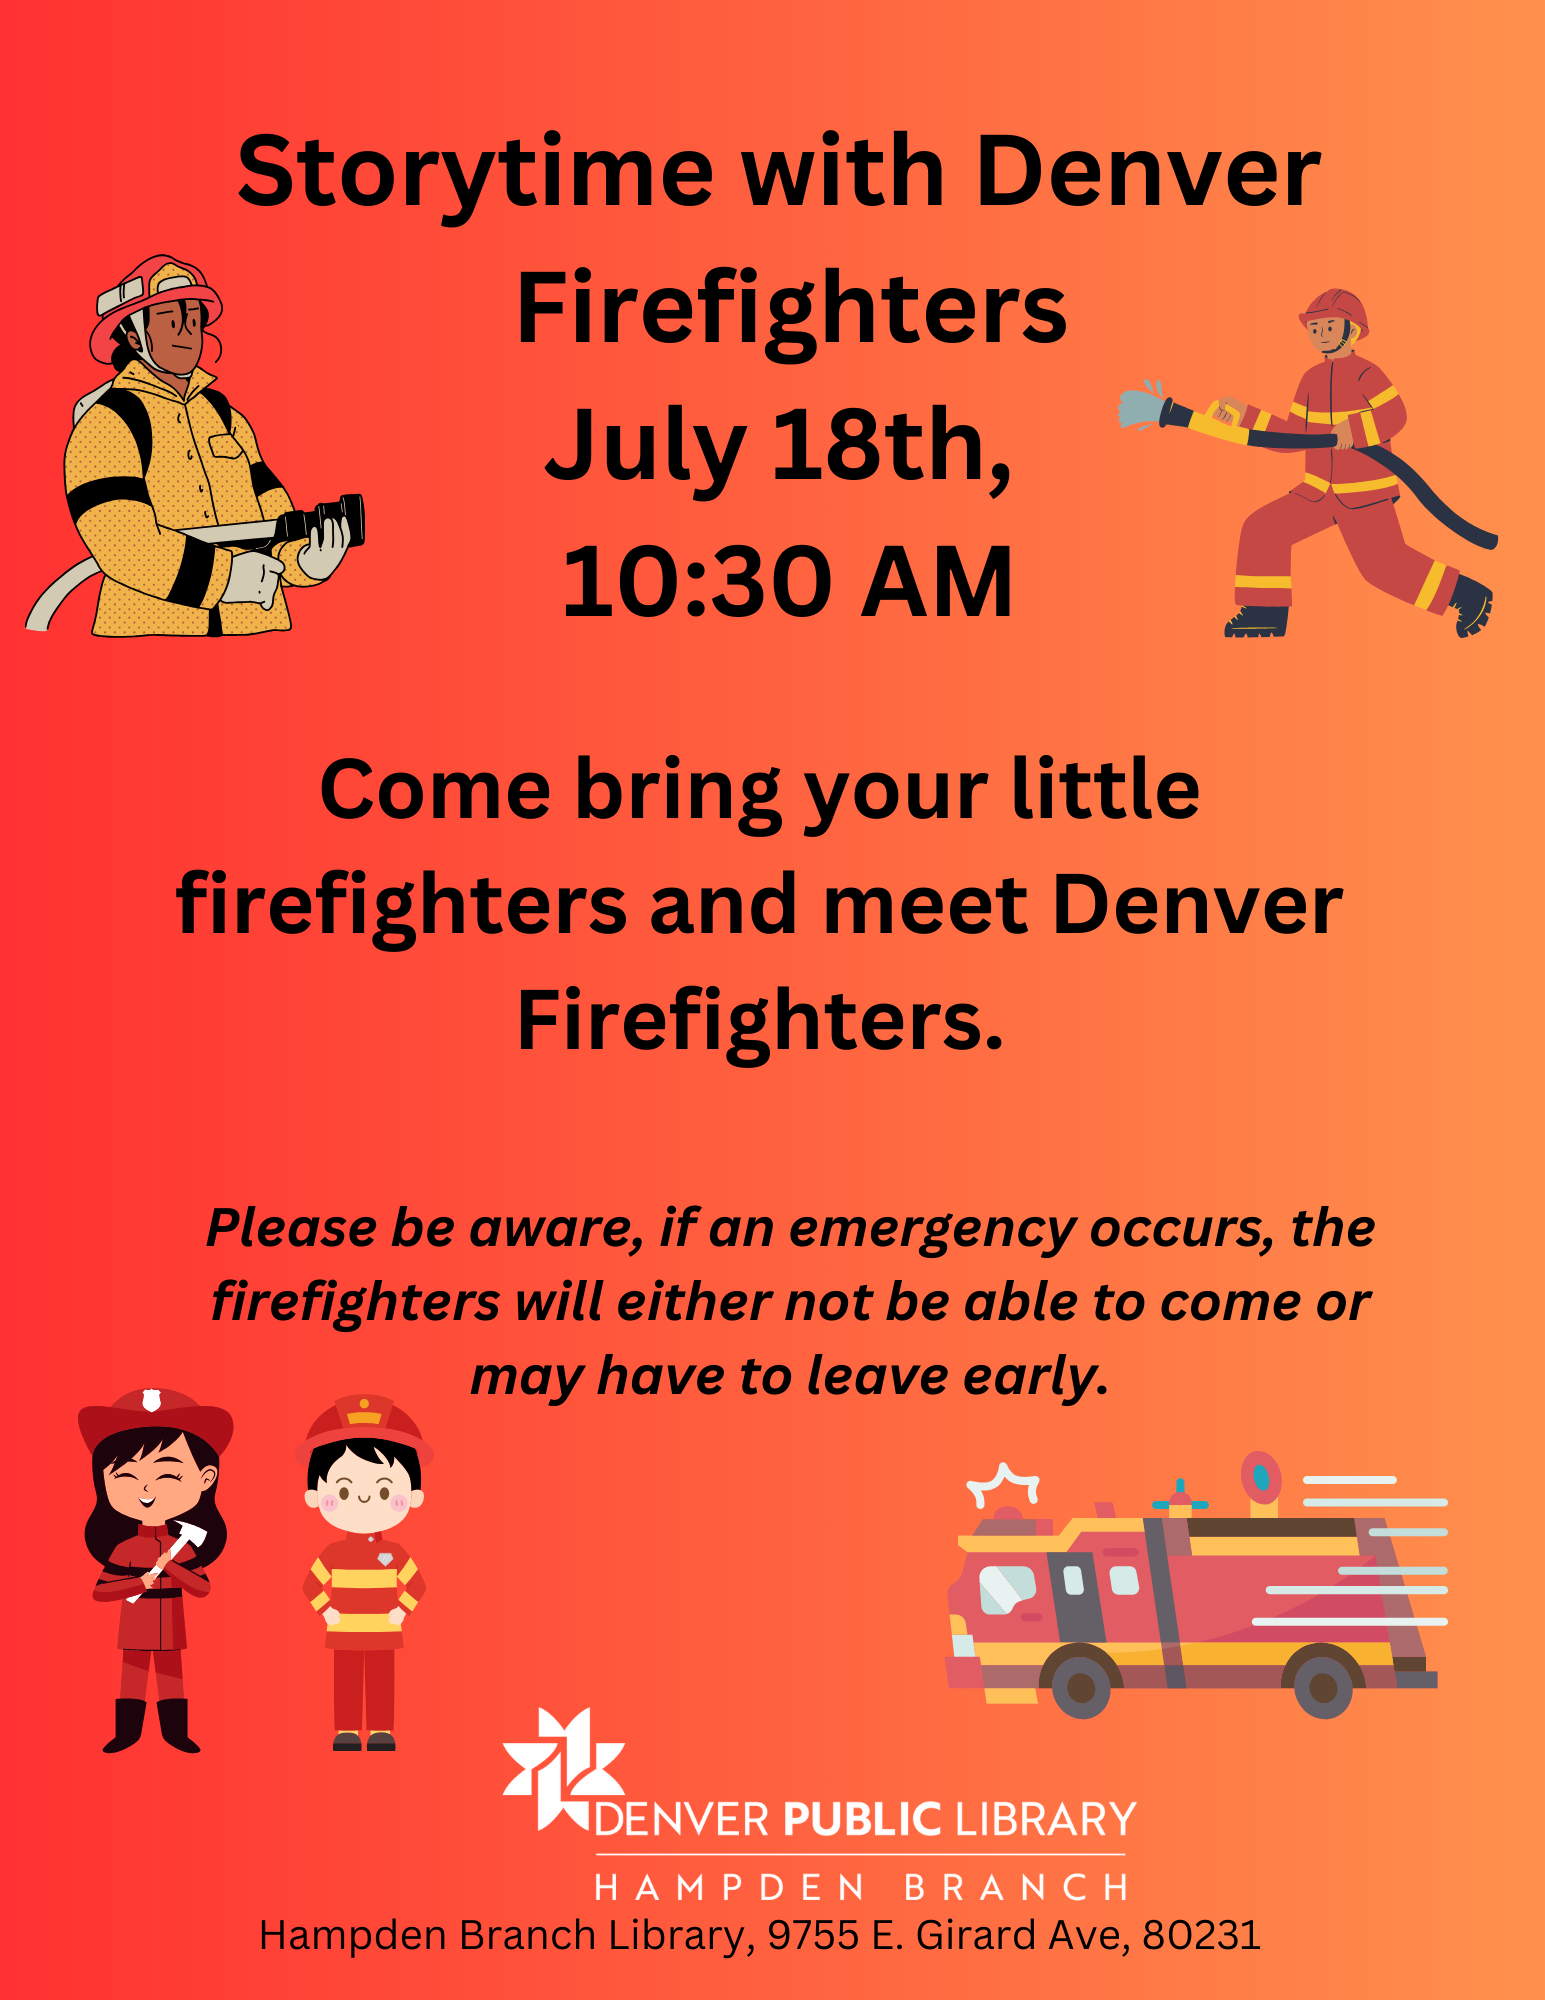 Storytime with Denver Firefighters